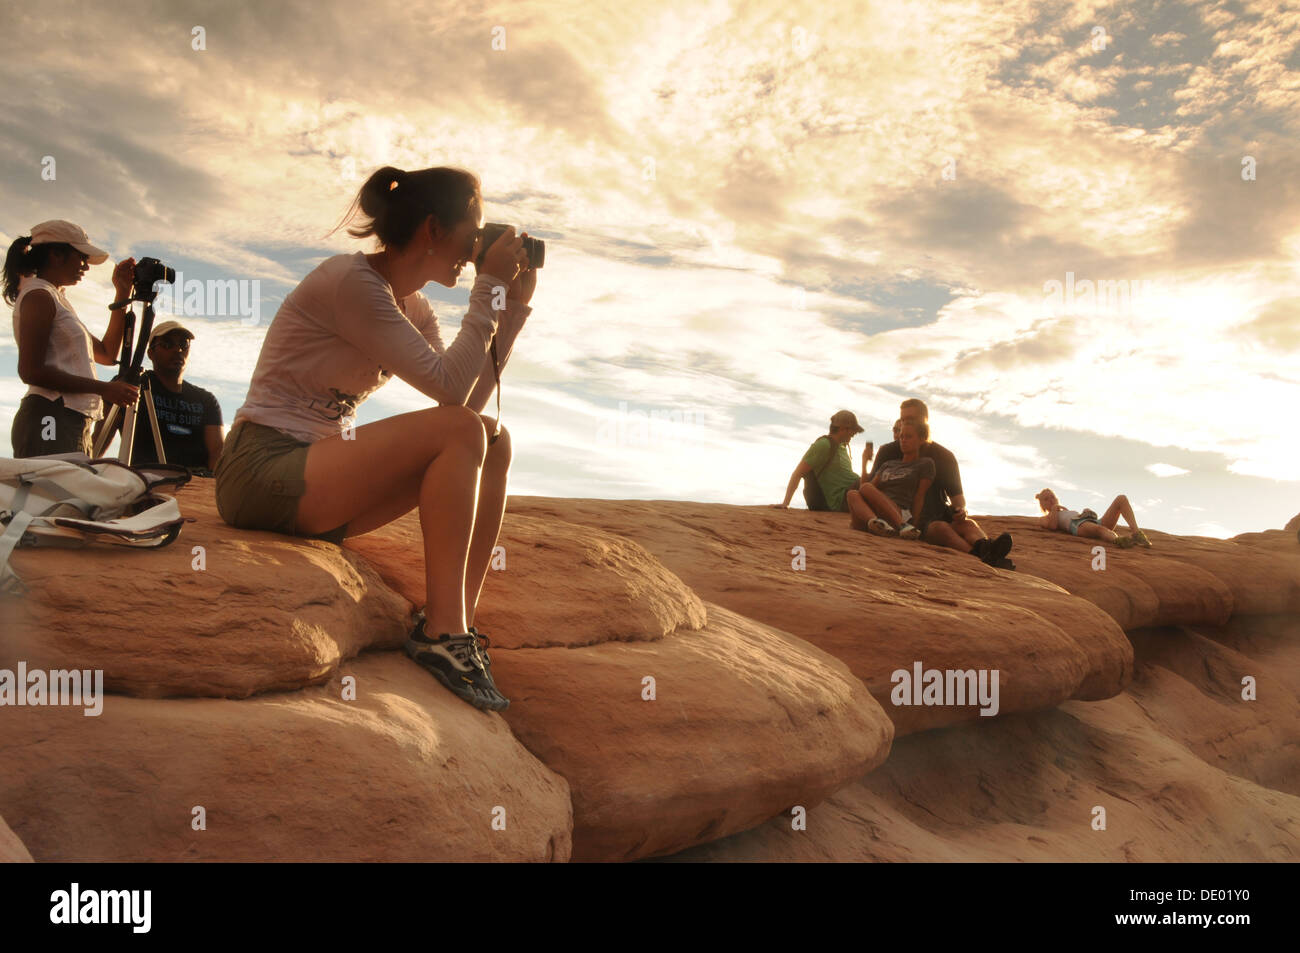 Visitors at Delicate Arch in Arches National Park in Utah taking photos at sunrise Stock Photo